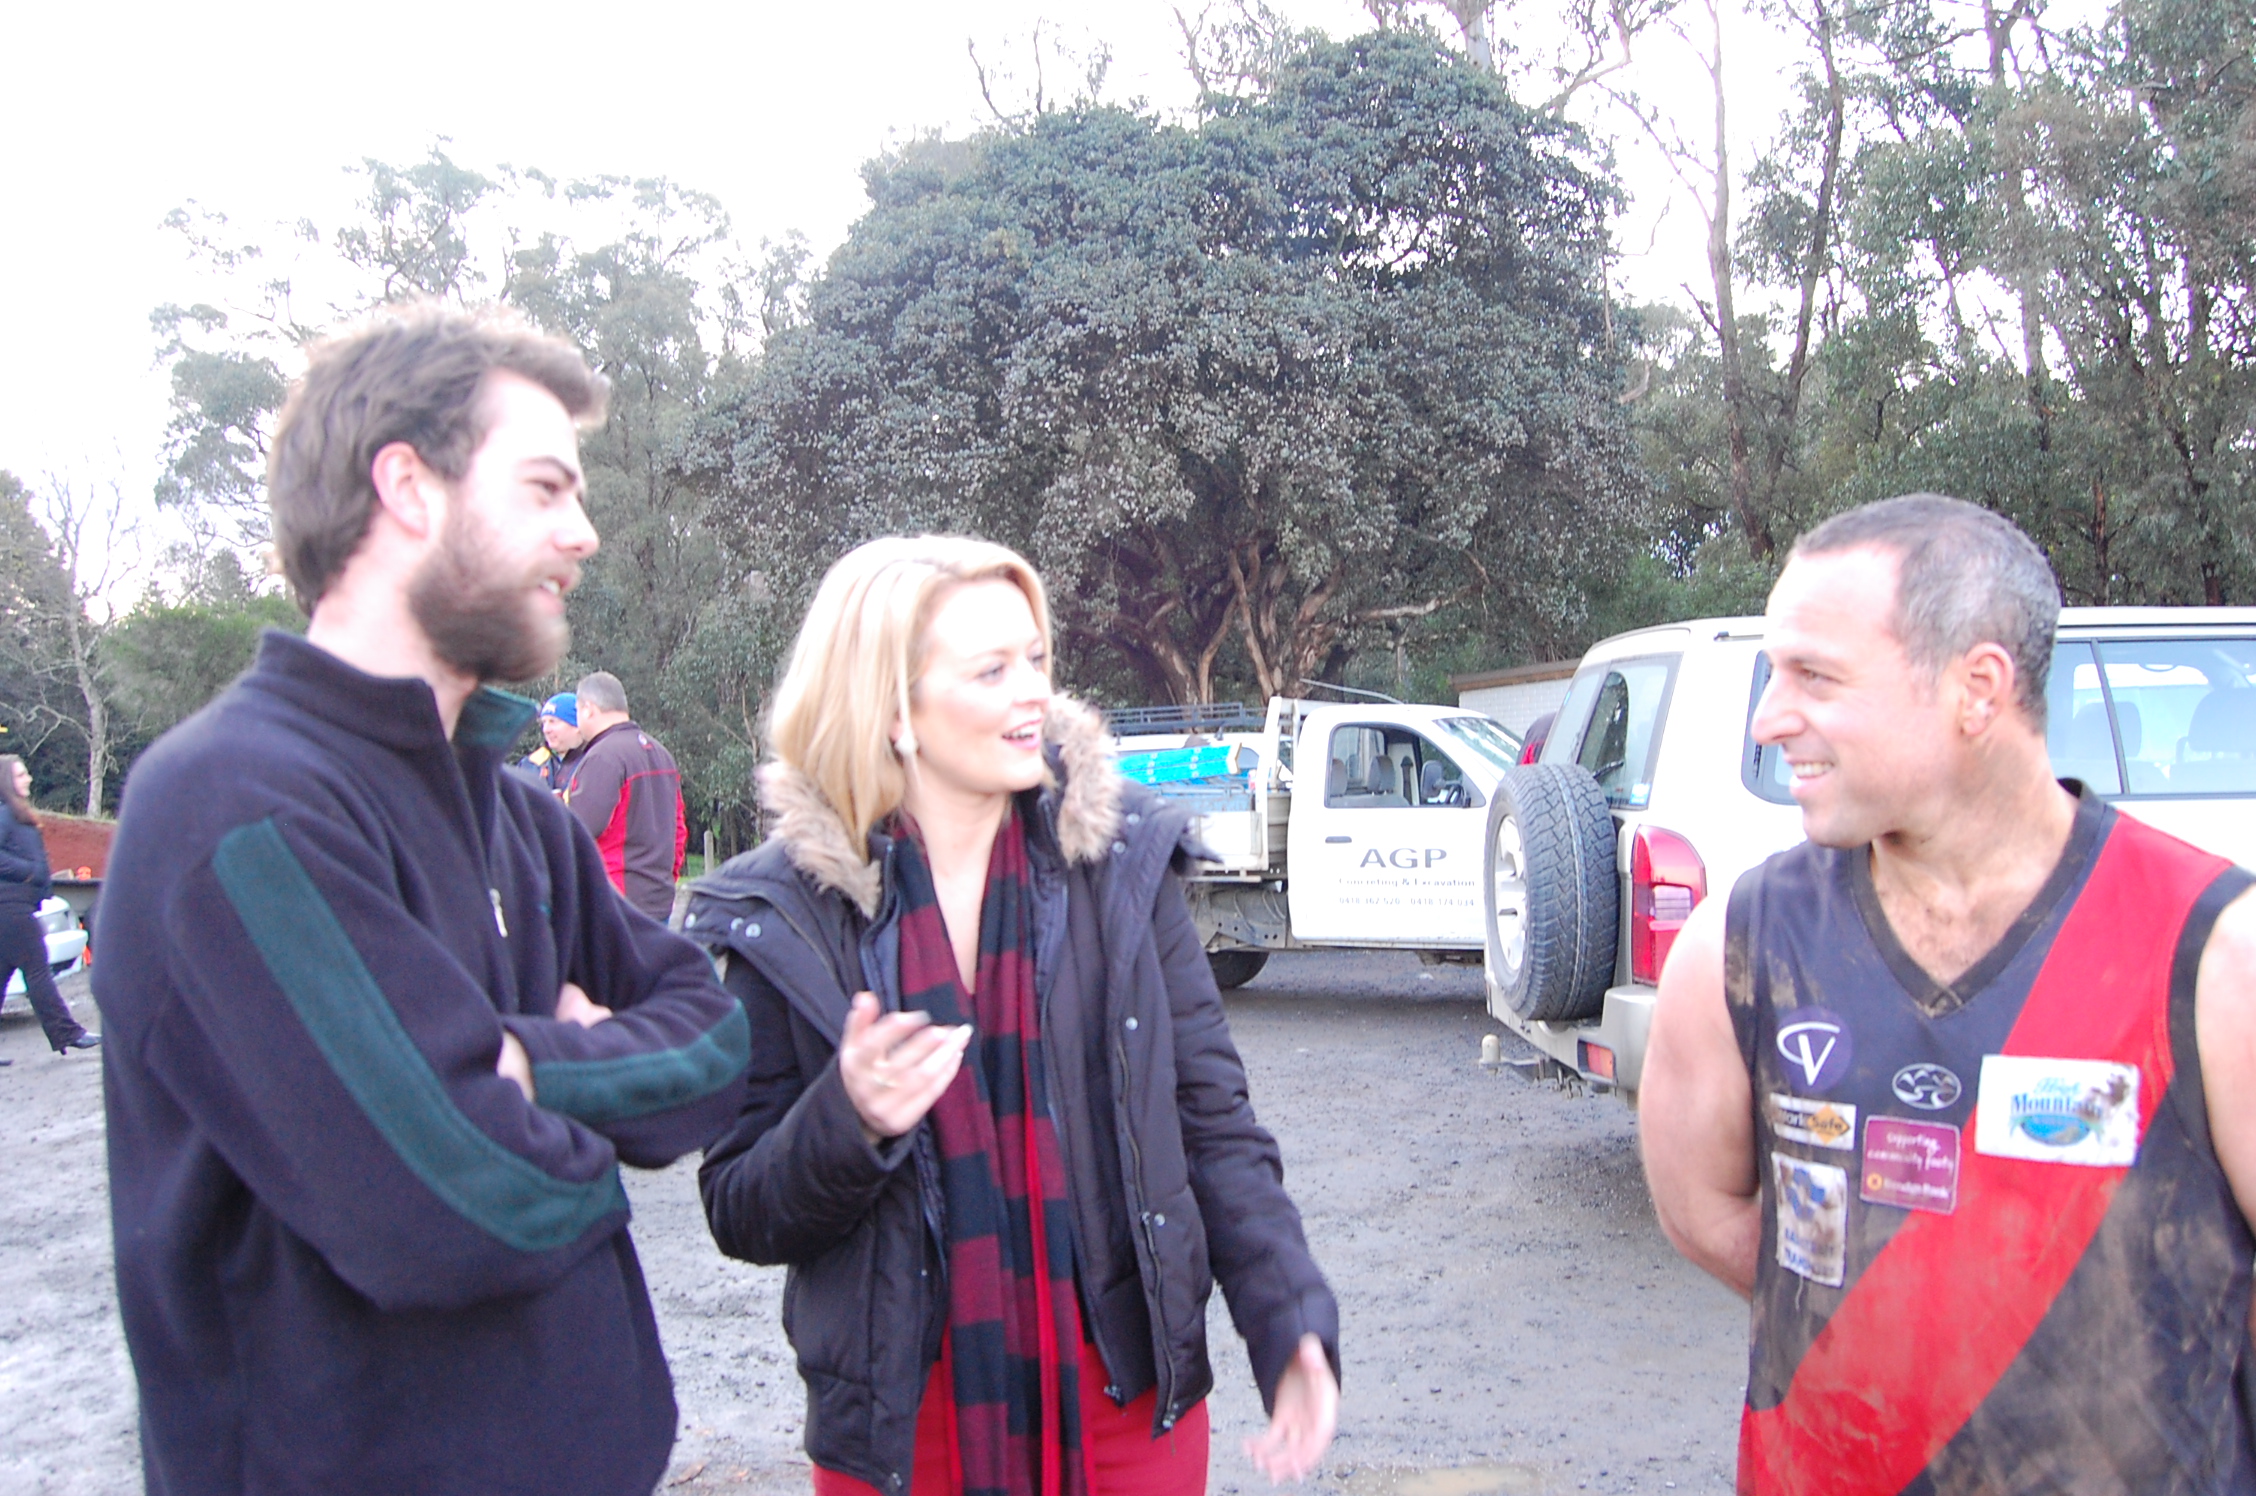 Behind the Scenes of Mud (Indep Short) with Director Dylan Corbett (left).